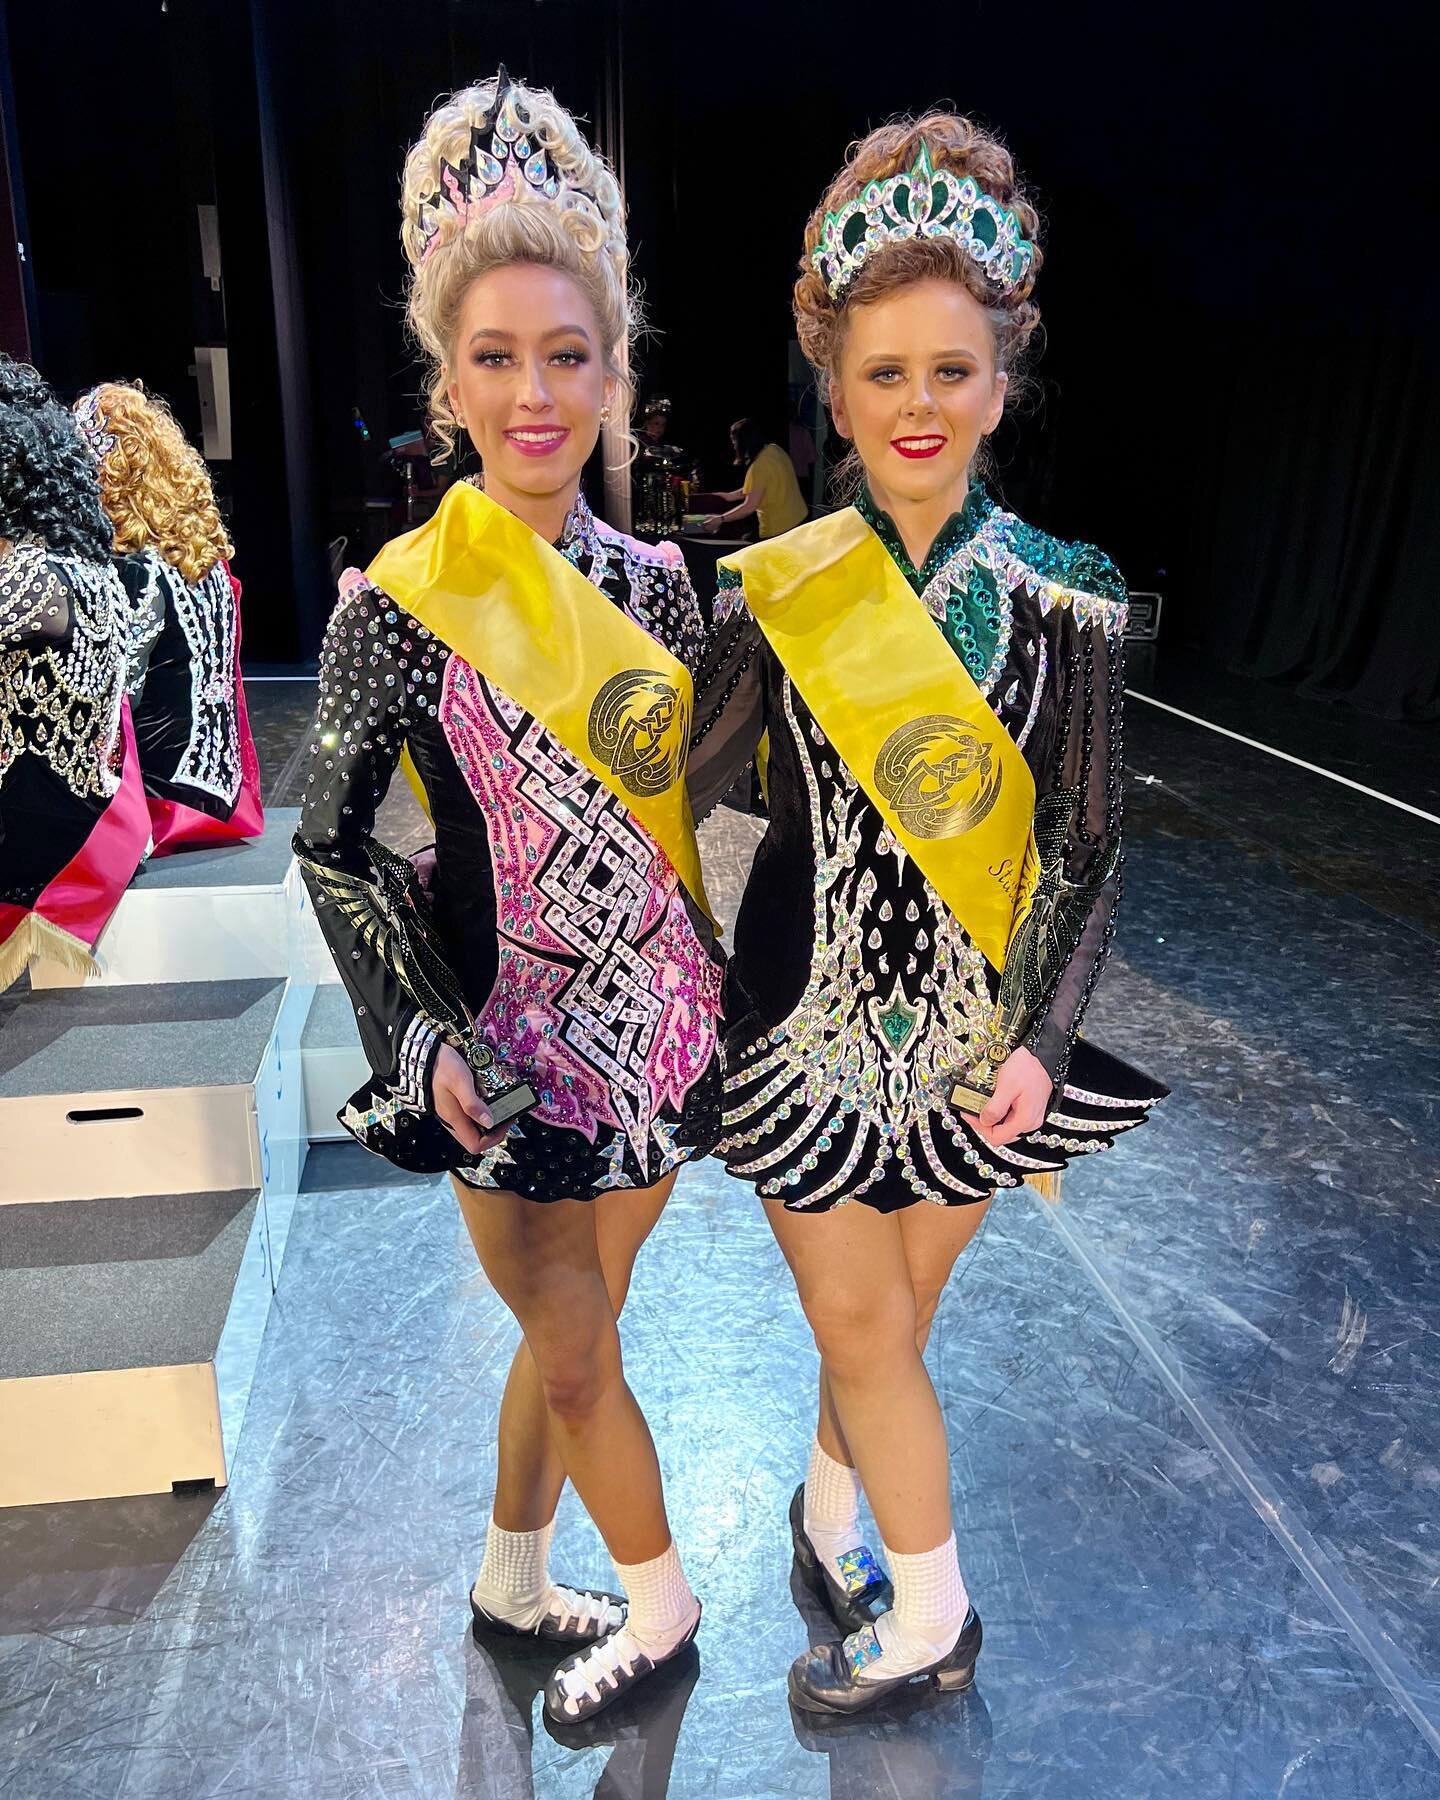 ✨ WA STATE CHAMPIONSHIPS ✨

Our lovely seniors finishing off the weekend with a bang! Well done on your beautiful dancing girls 🤍

18 Years Ladies
🏅4th Place - Lauren Bye

19 Years Ladies
🏅4th Place - Tara Collis

Couldn&rsquo;t be more proud of a